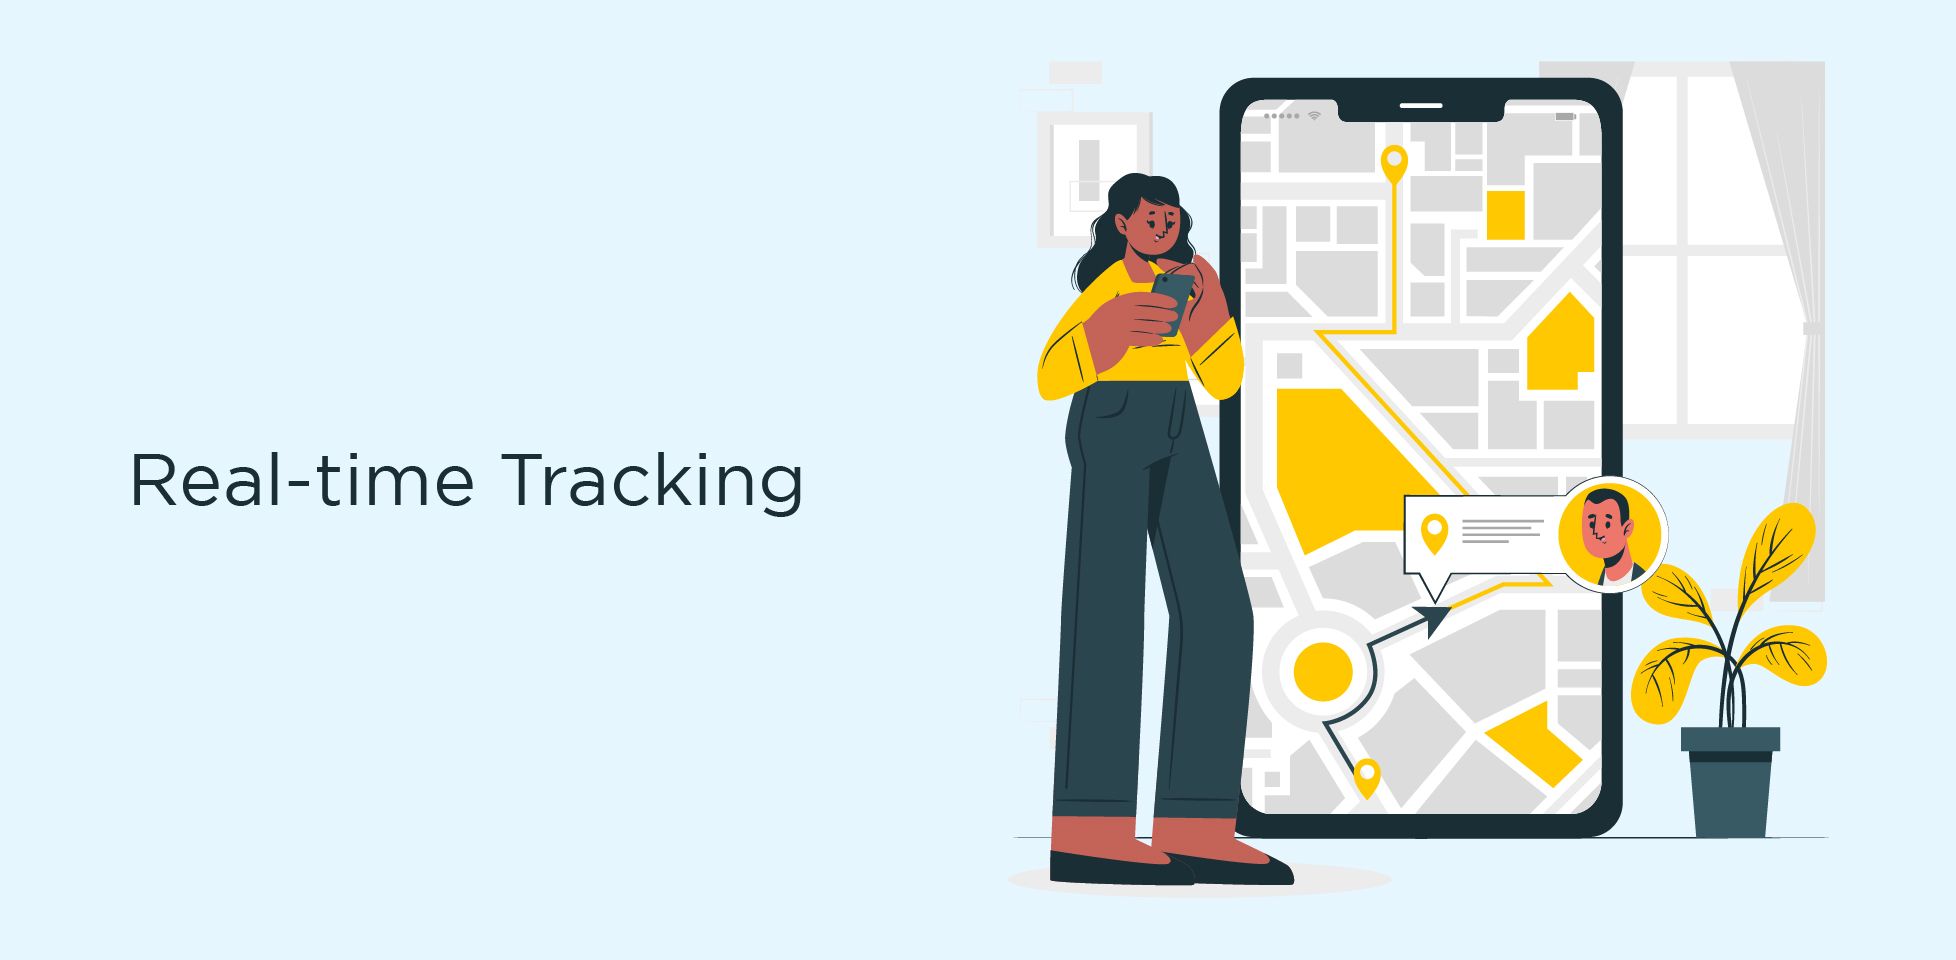 Real-time Tracking